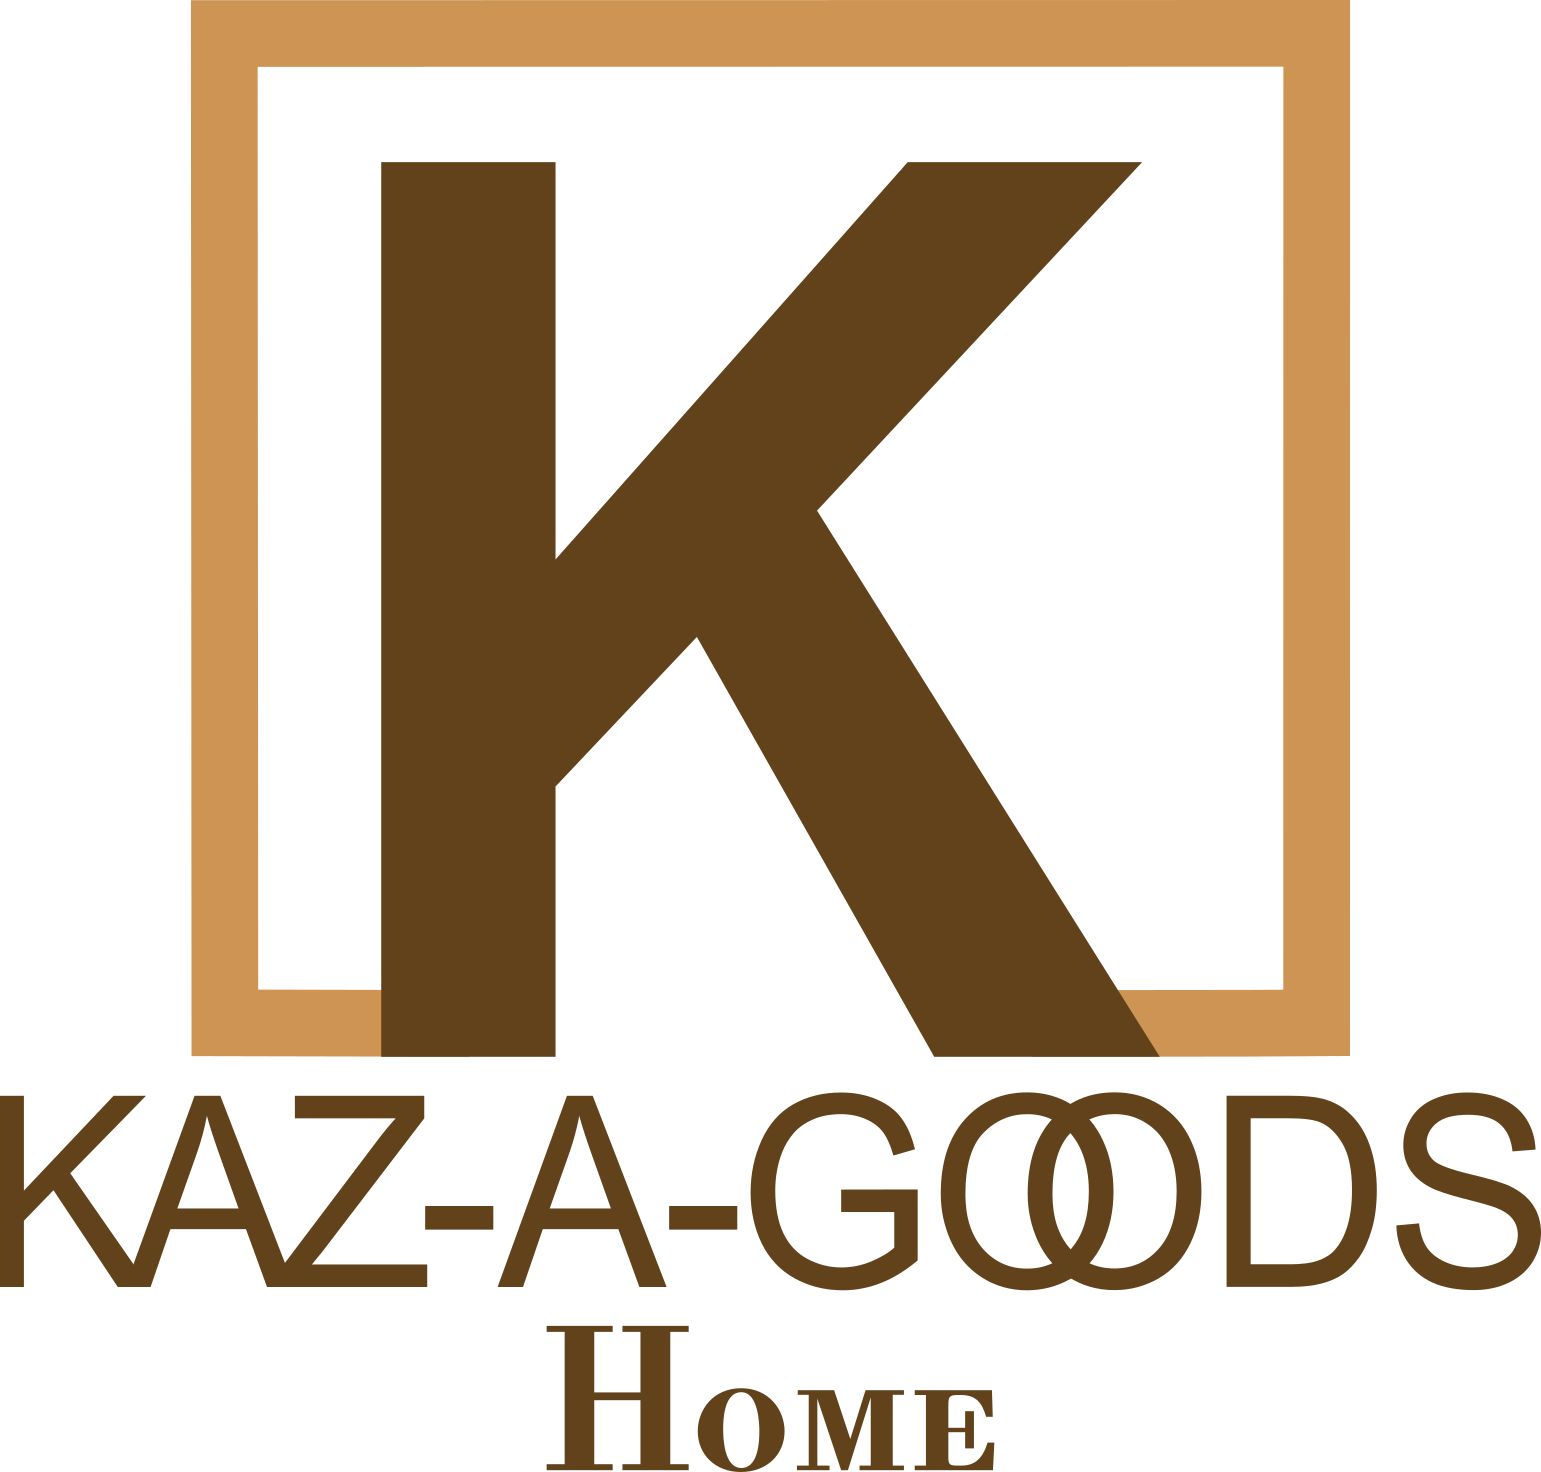 Kaz-A-Googs Home a store where women and men can buy practical mobile accessories, useful kitchen implements, comfortable clothes to chill at home or host friendly venues